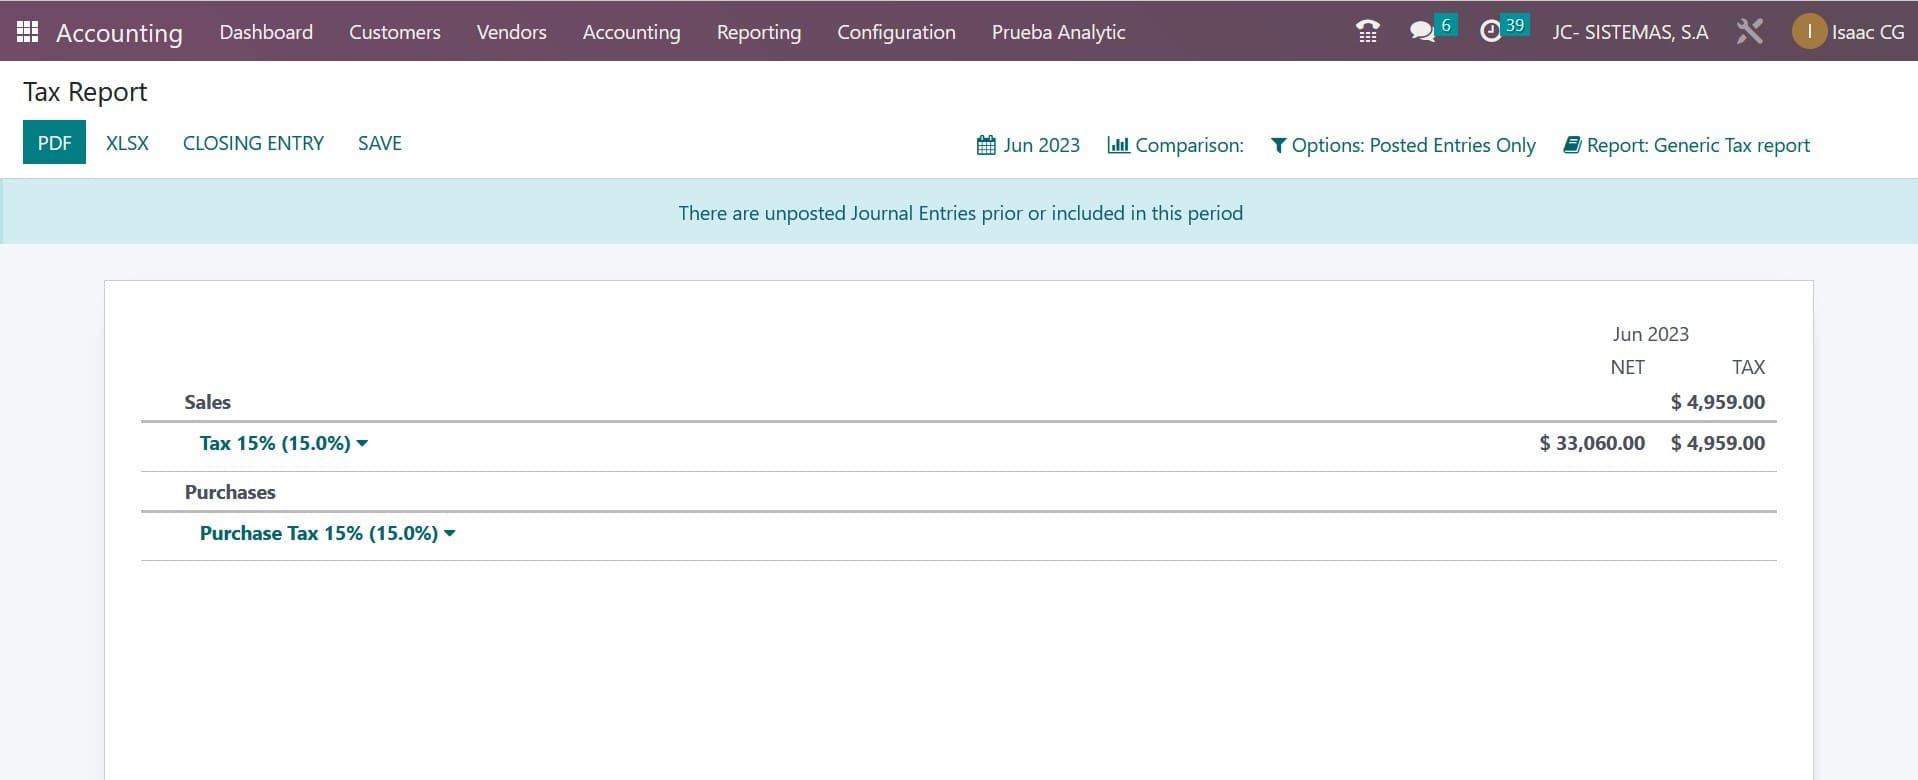 How to Configure Taxes With Odoo 16 Accounting App-cybrosys